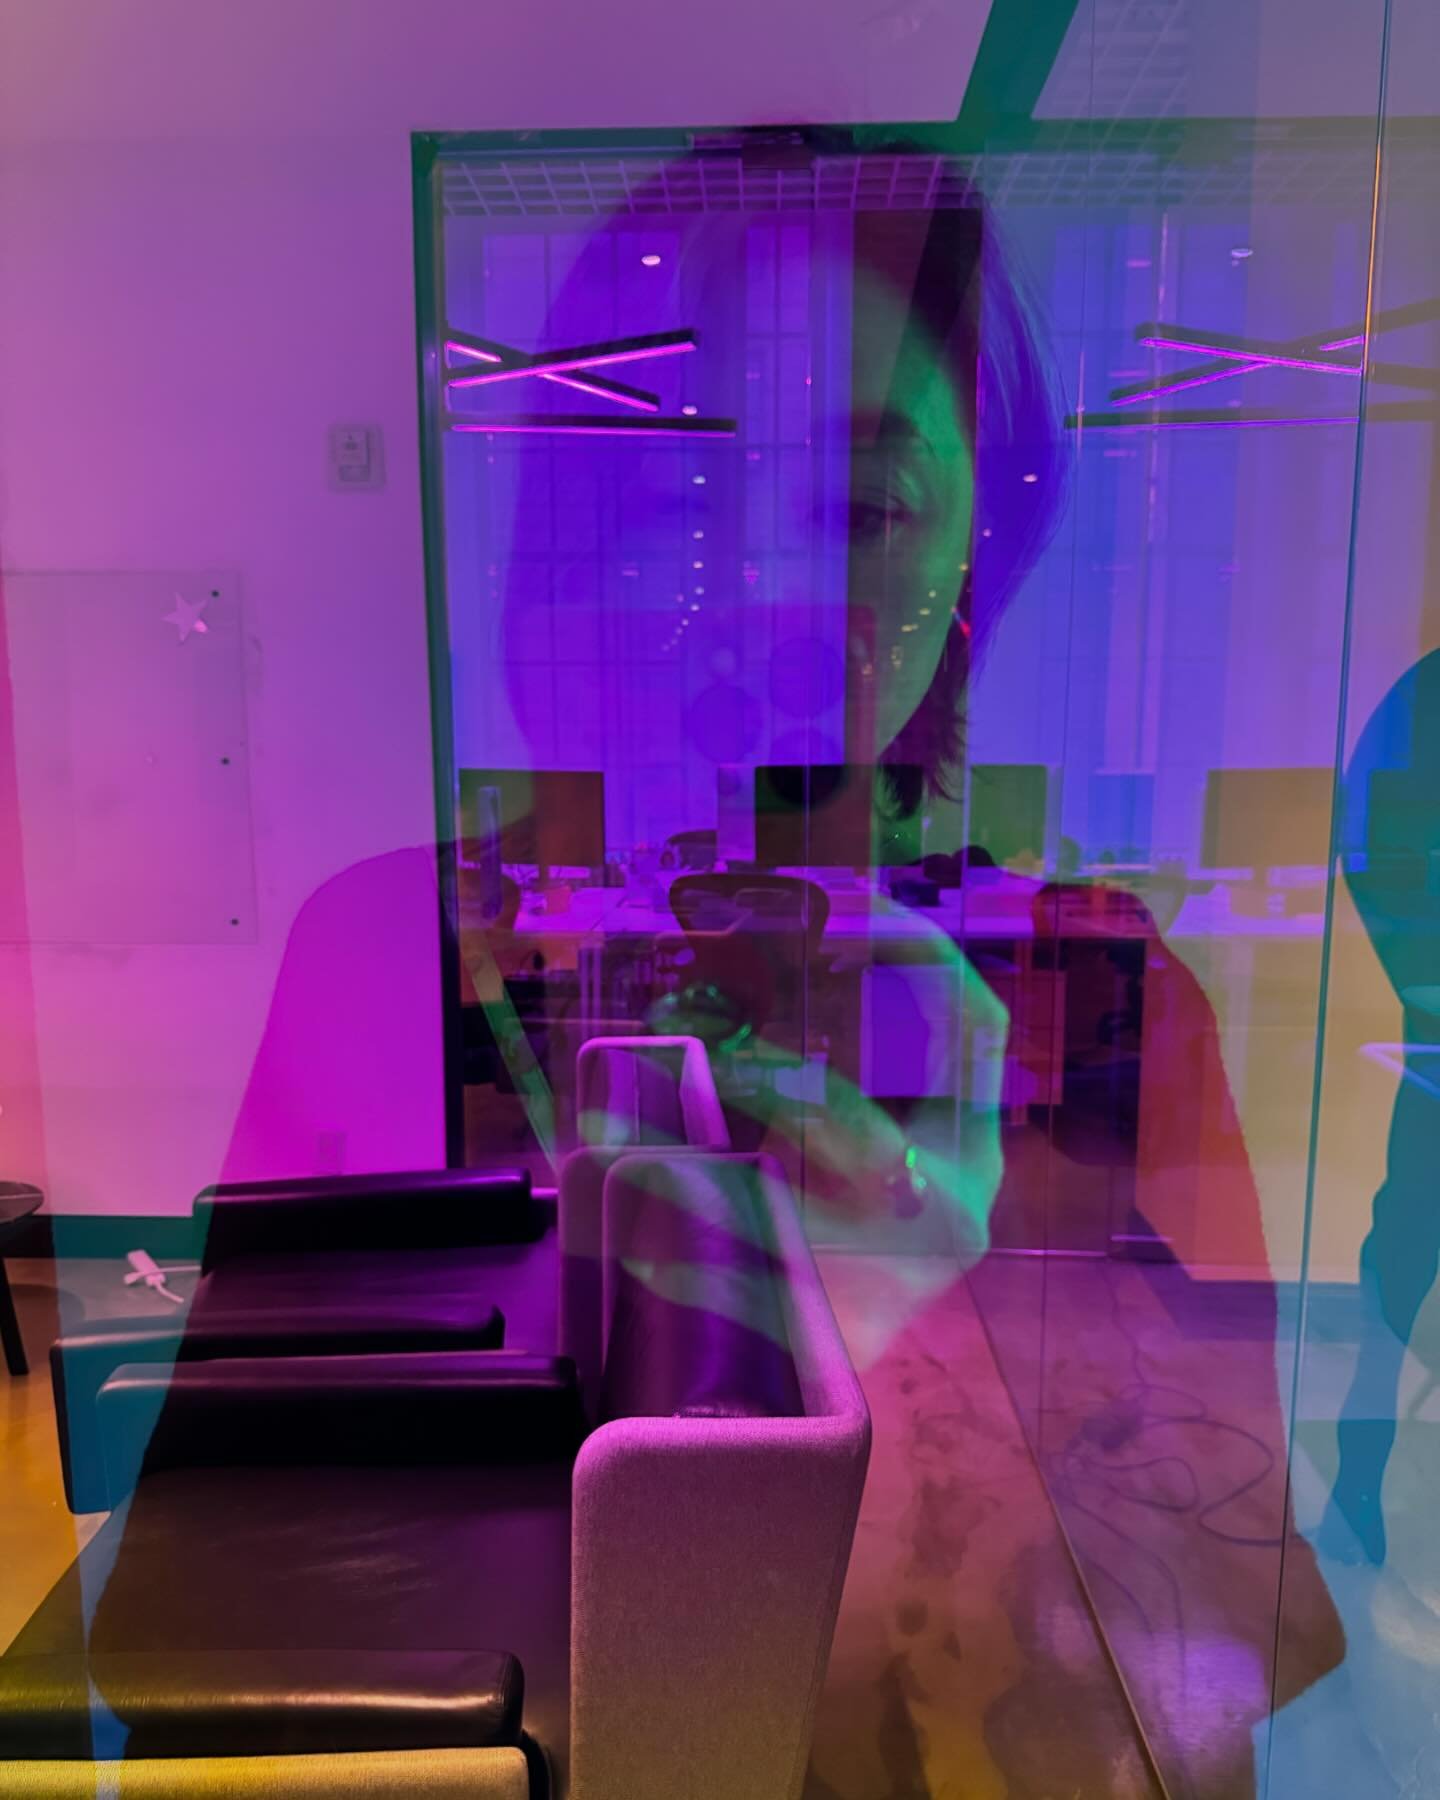 Holographic room fun💜💛🩷💚 It&rsquo;s a conference room with holography glass in a super creative office. And no, there&rsquo;s no filter on this experience! Sadly, this location is closing, so this visit is my last as a guest. Whenever I visit off